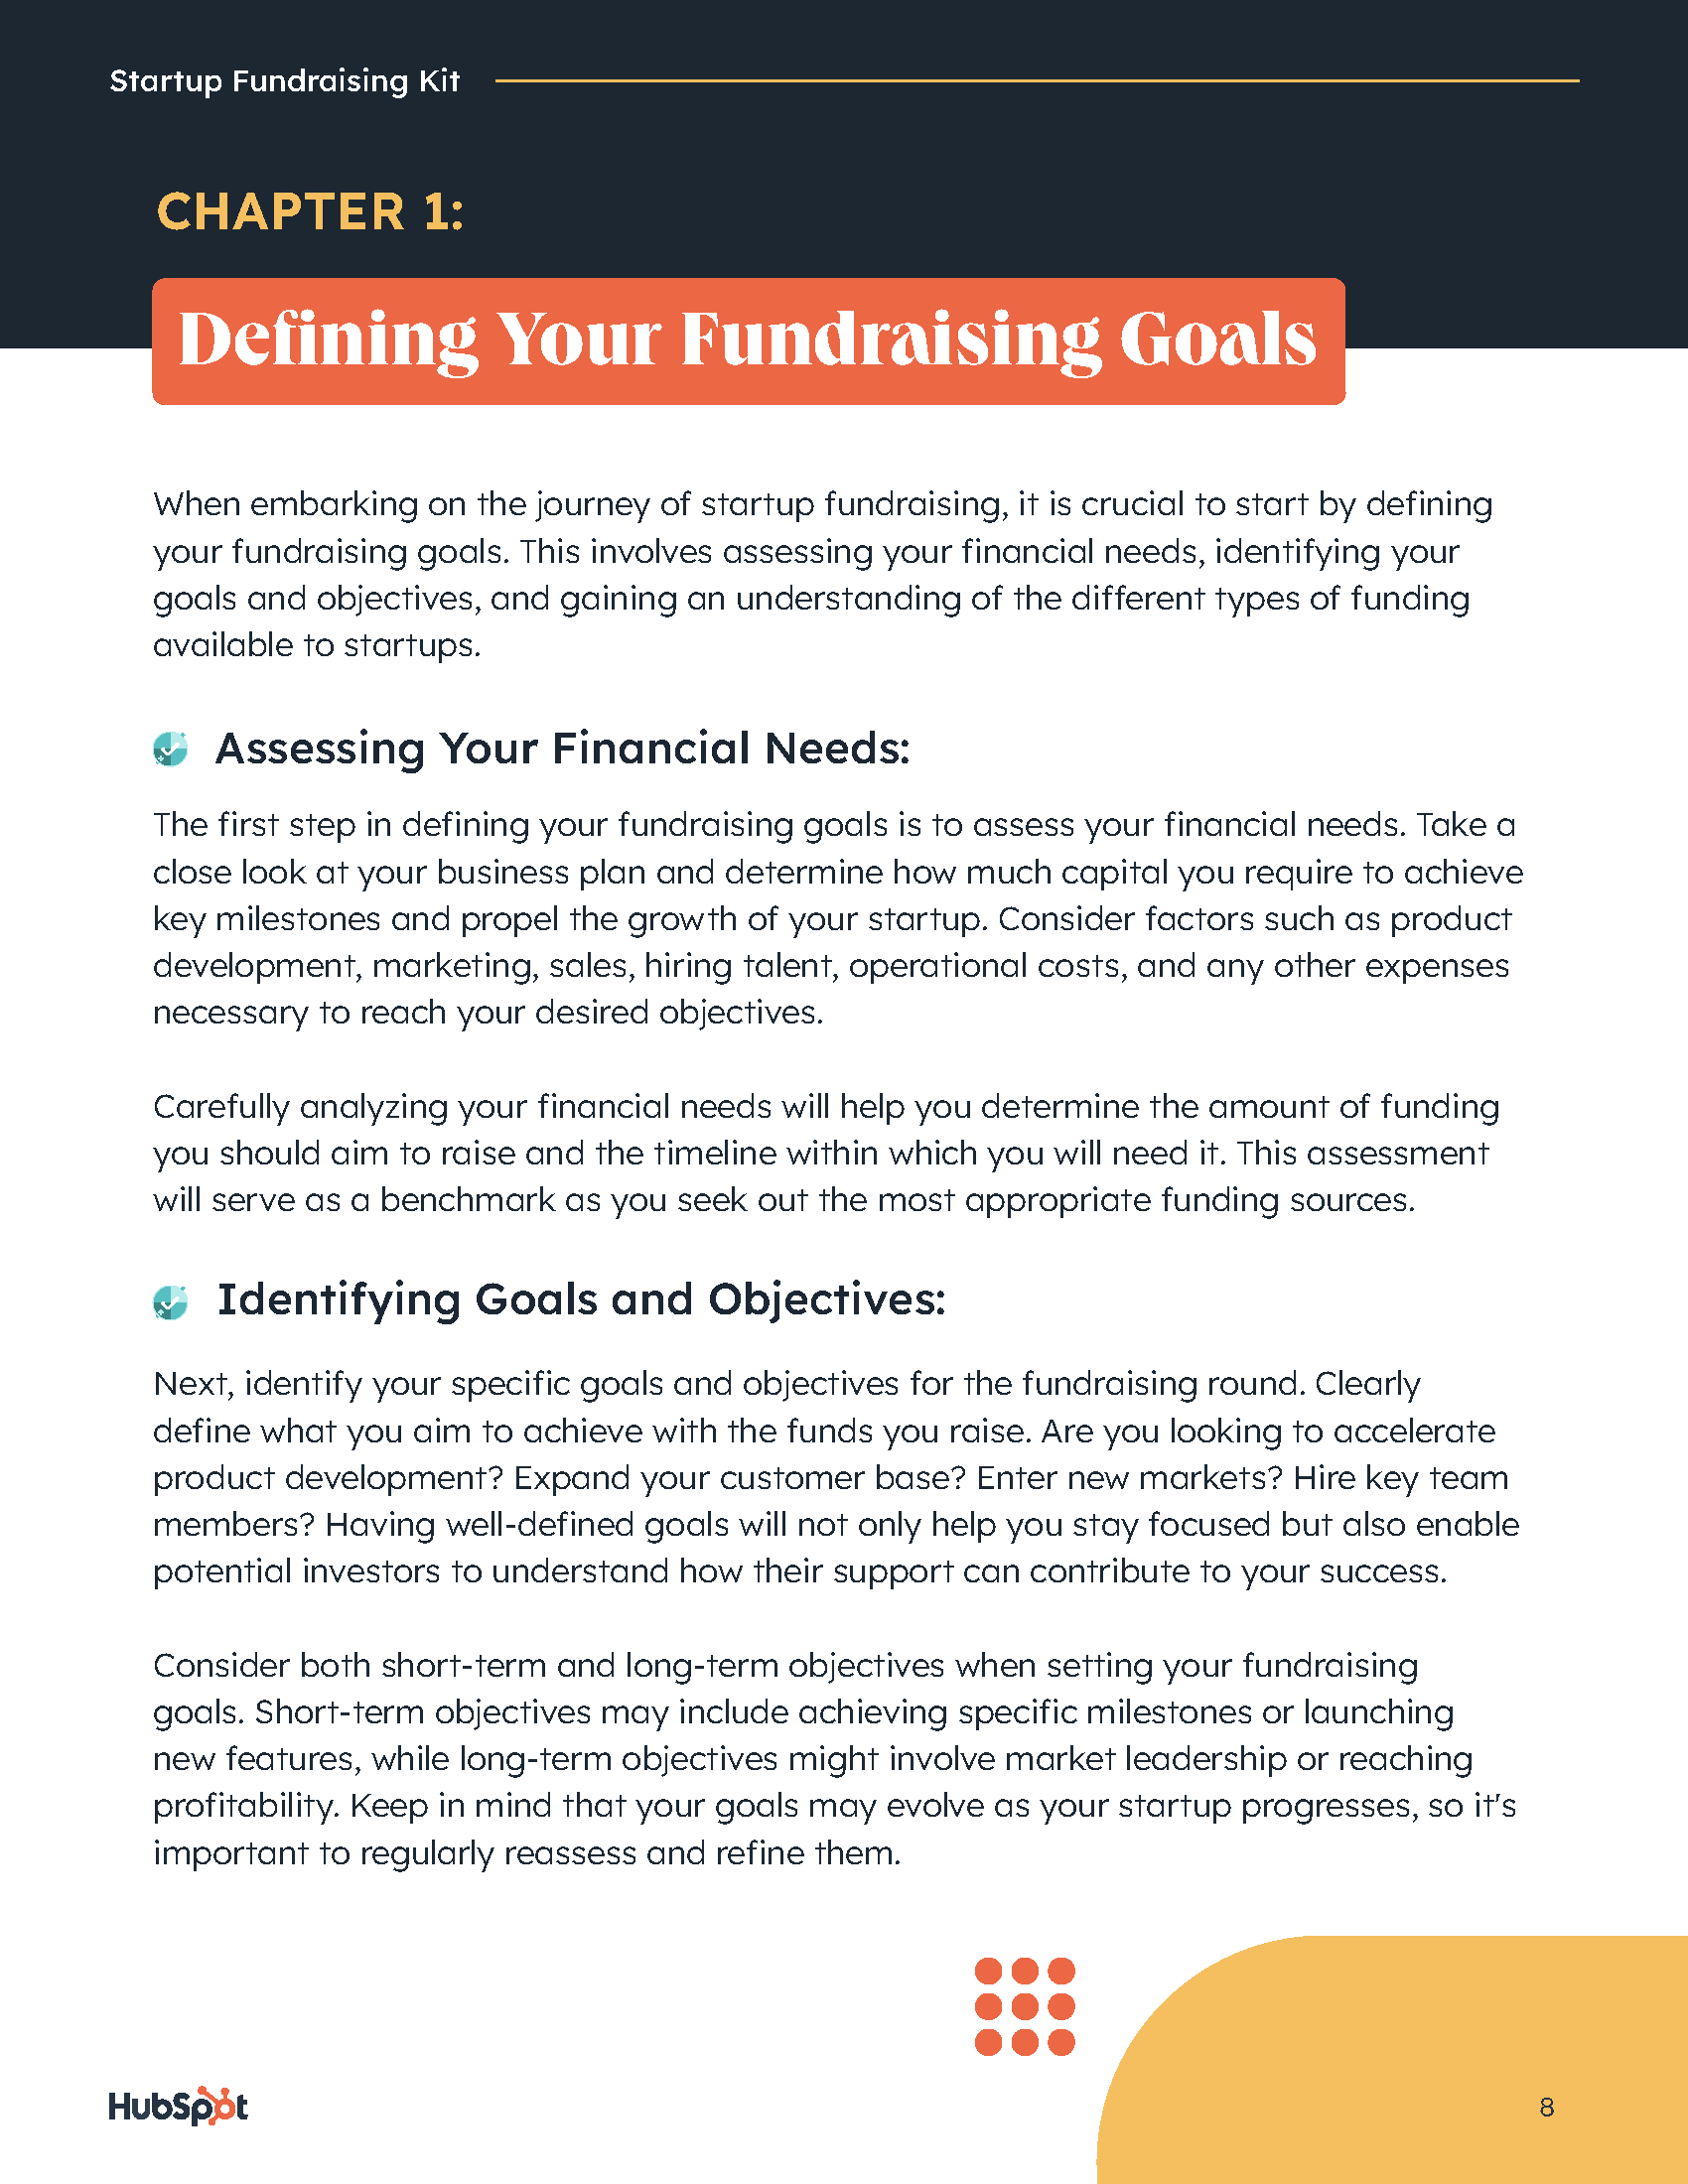 HubSpots Startup Fundraising Kit_Page_08